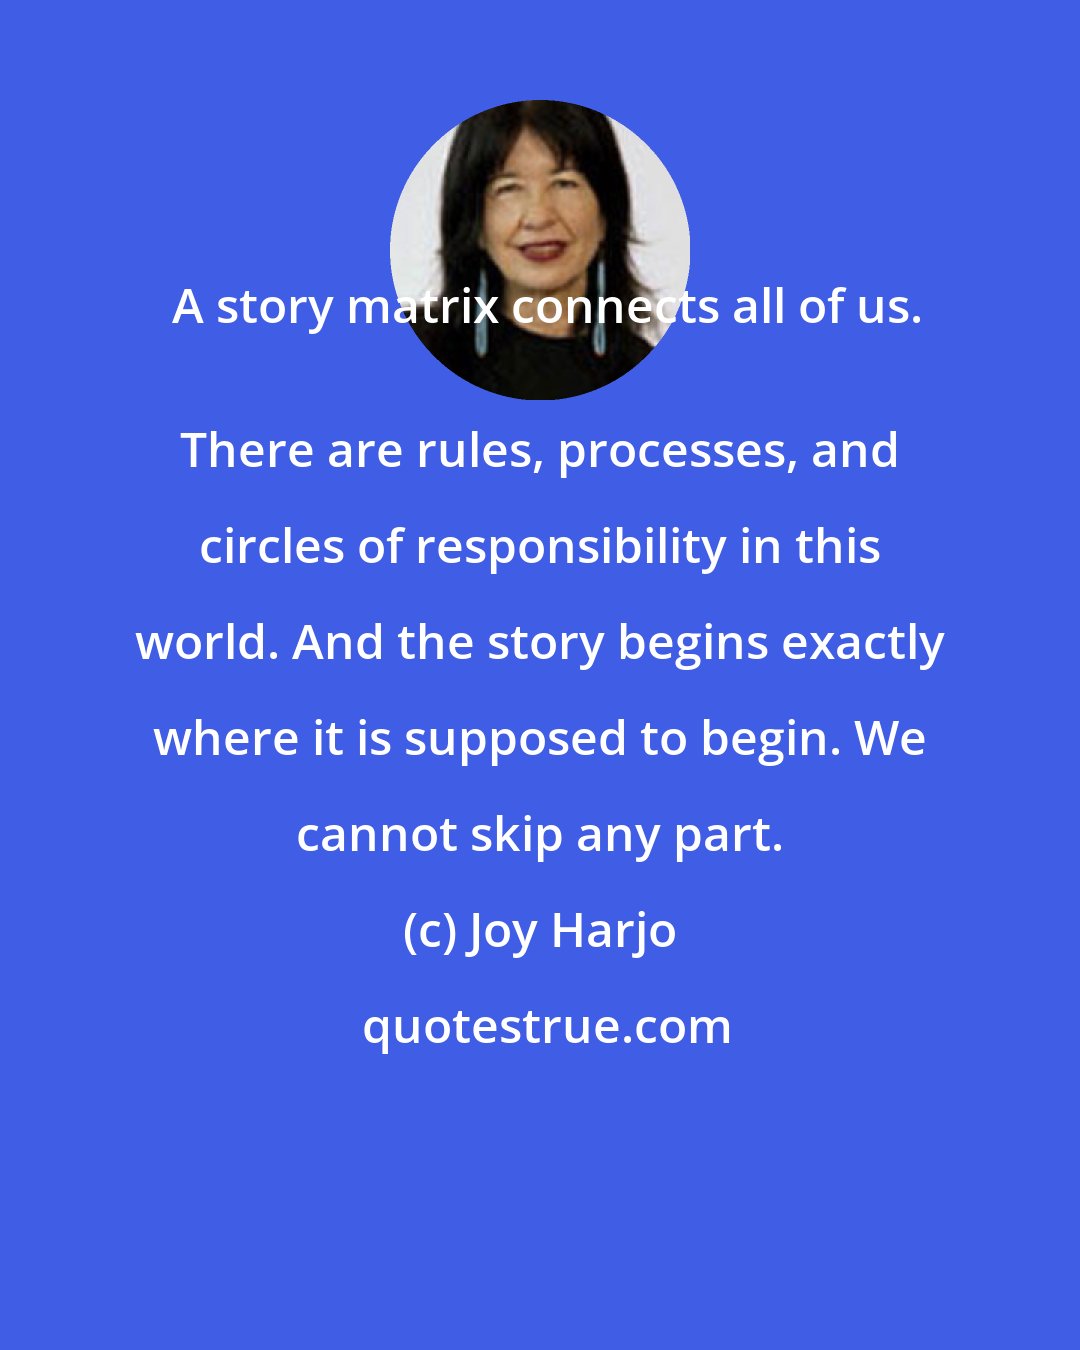 Joy Harjo: A story matrix connects all of us.
 There are rules, processes, and circles of responsibility in this world. And the story begins exactly where it is supposed to begin. We cannot skip any part.